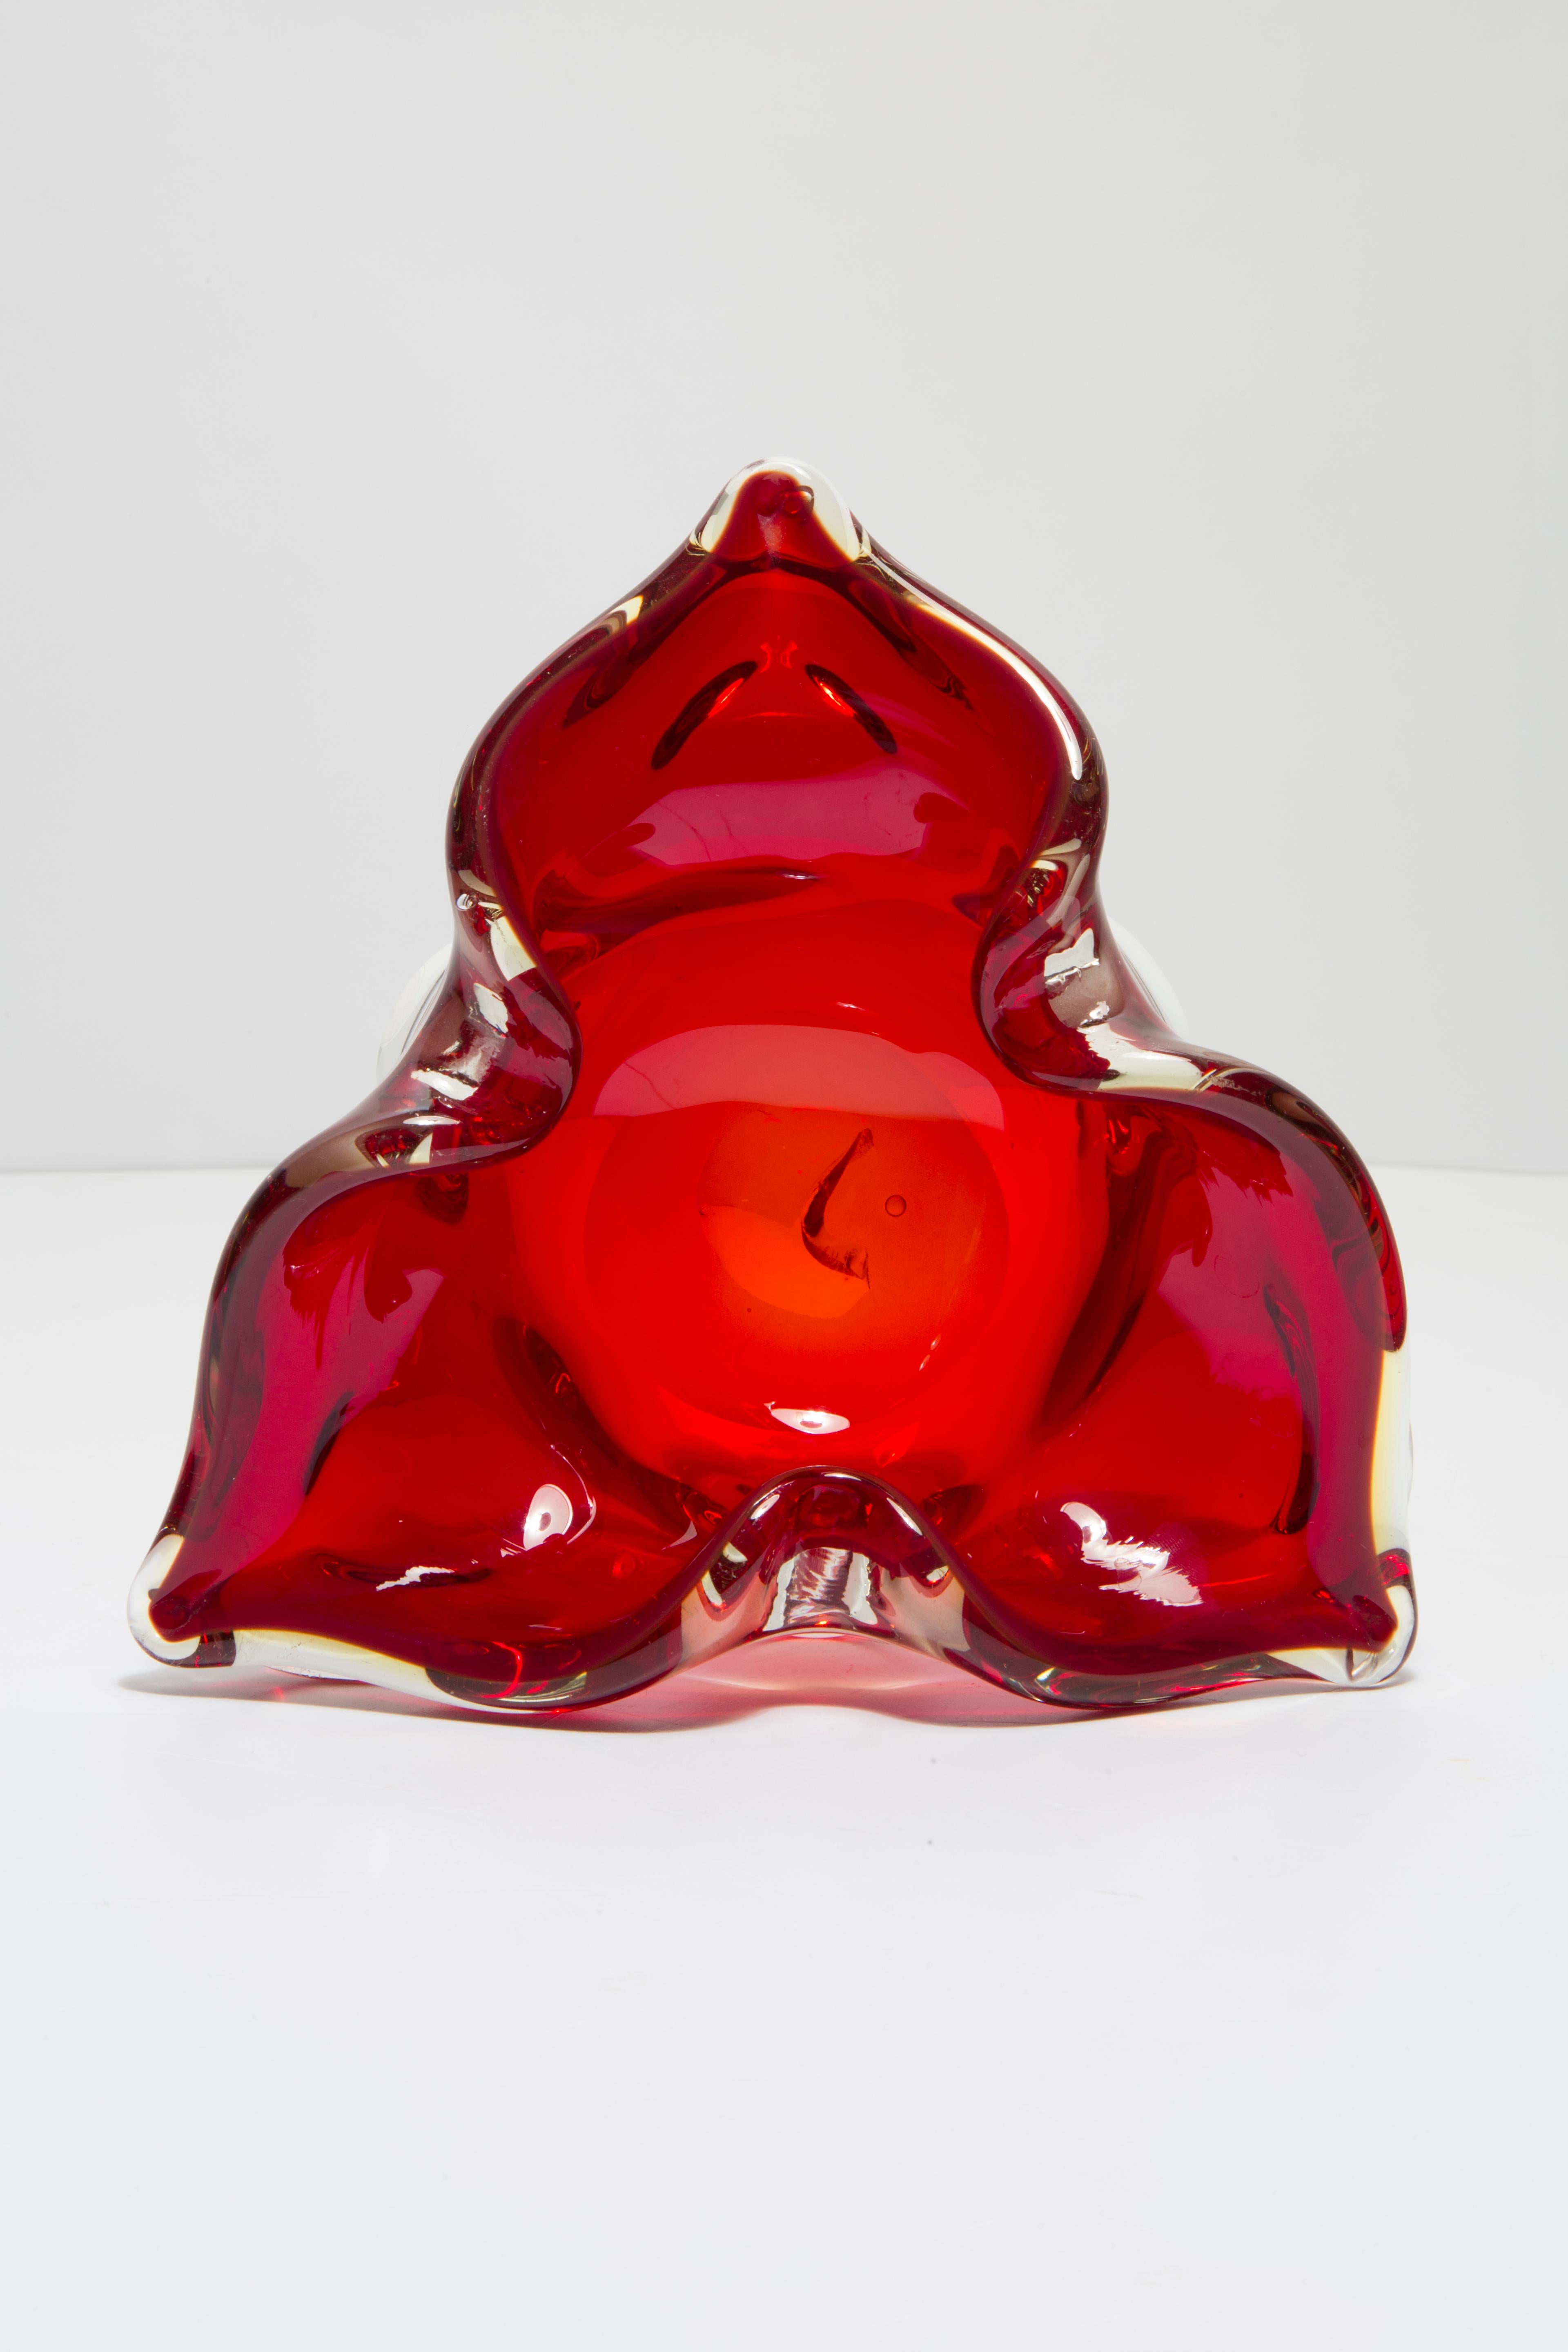 Mid Century Crystal Red Artistic Glass Ashtray Bowl, Italy, 1970s For Sale 4